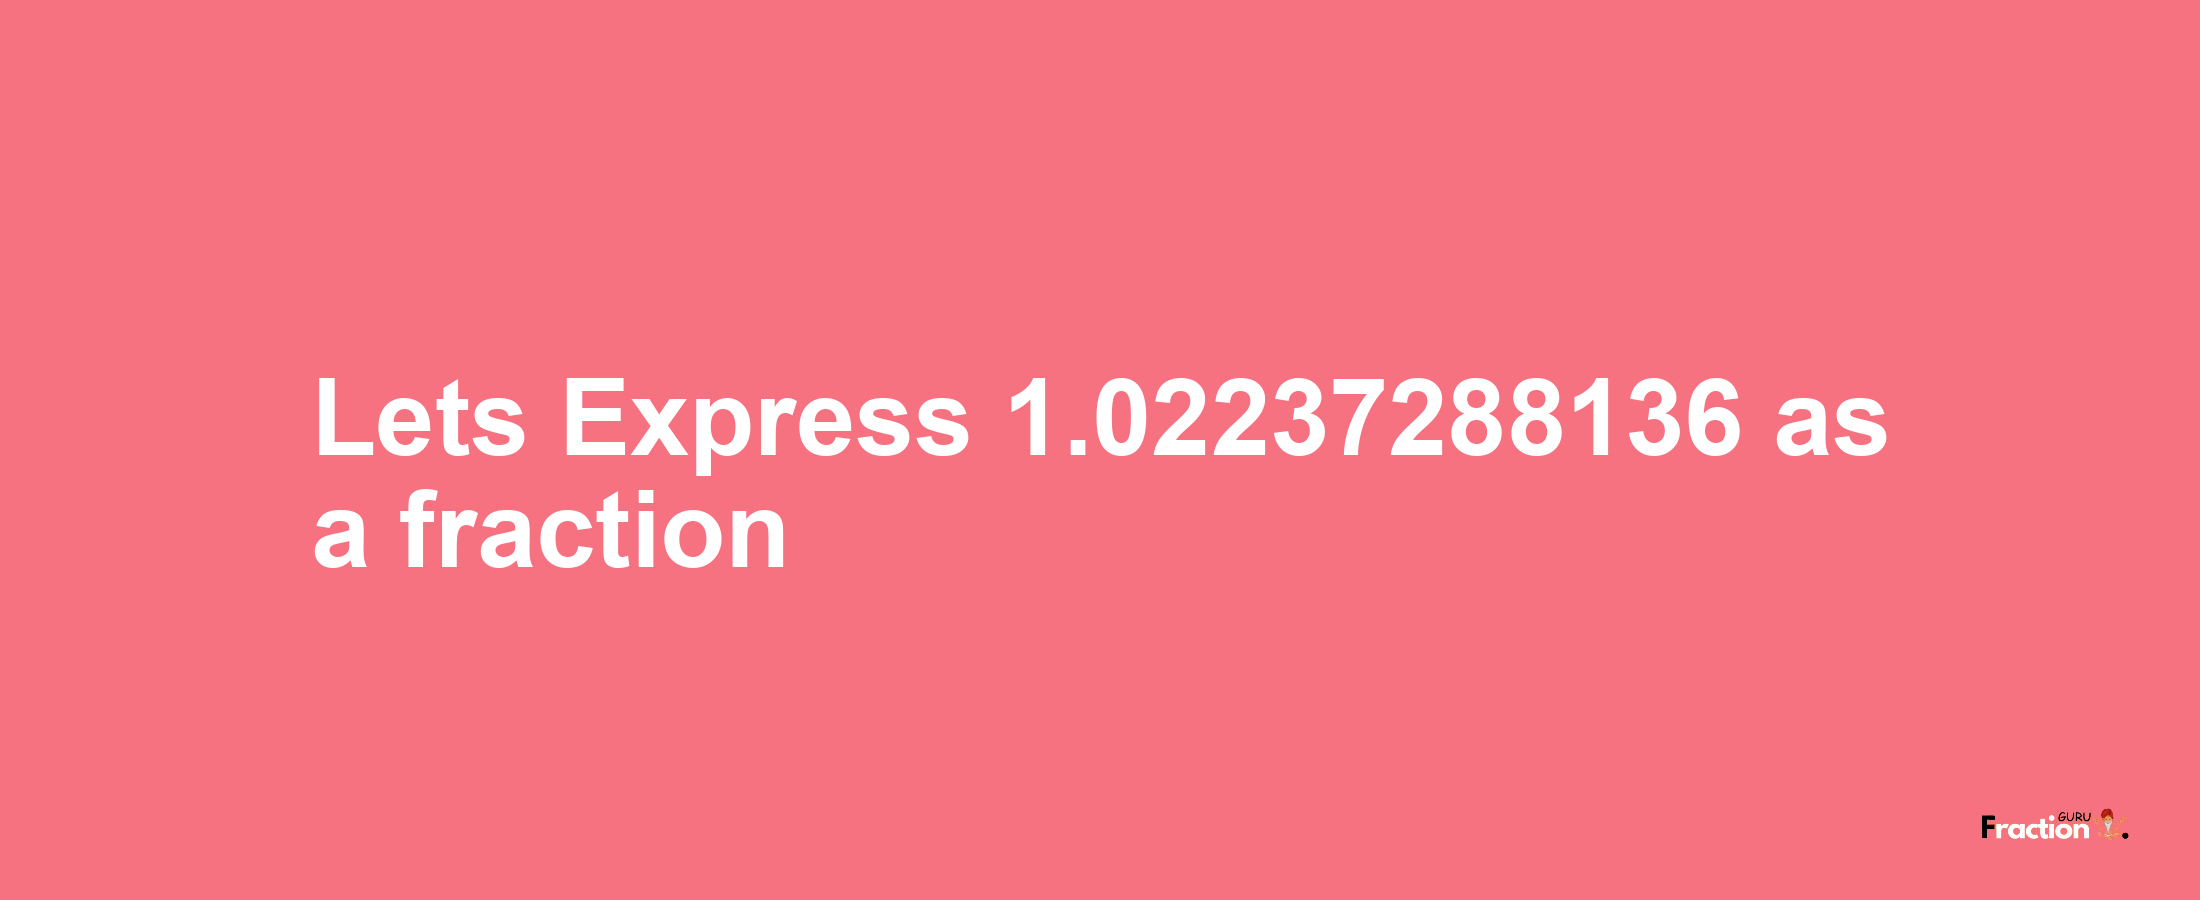 Lets Express 1.02237288136 as afraction